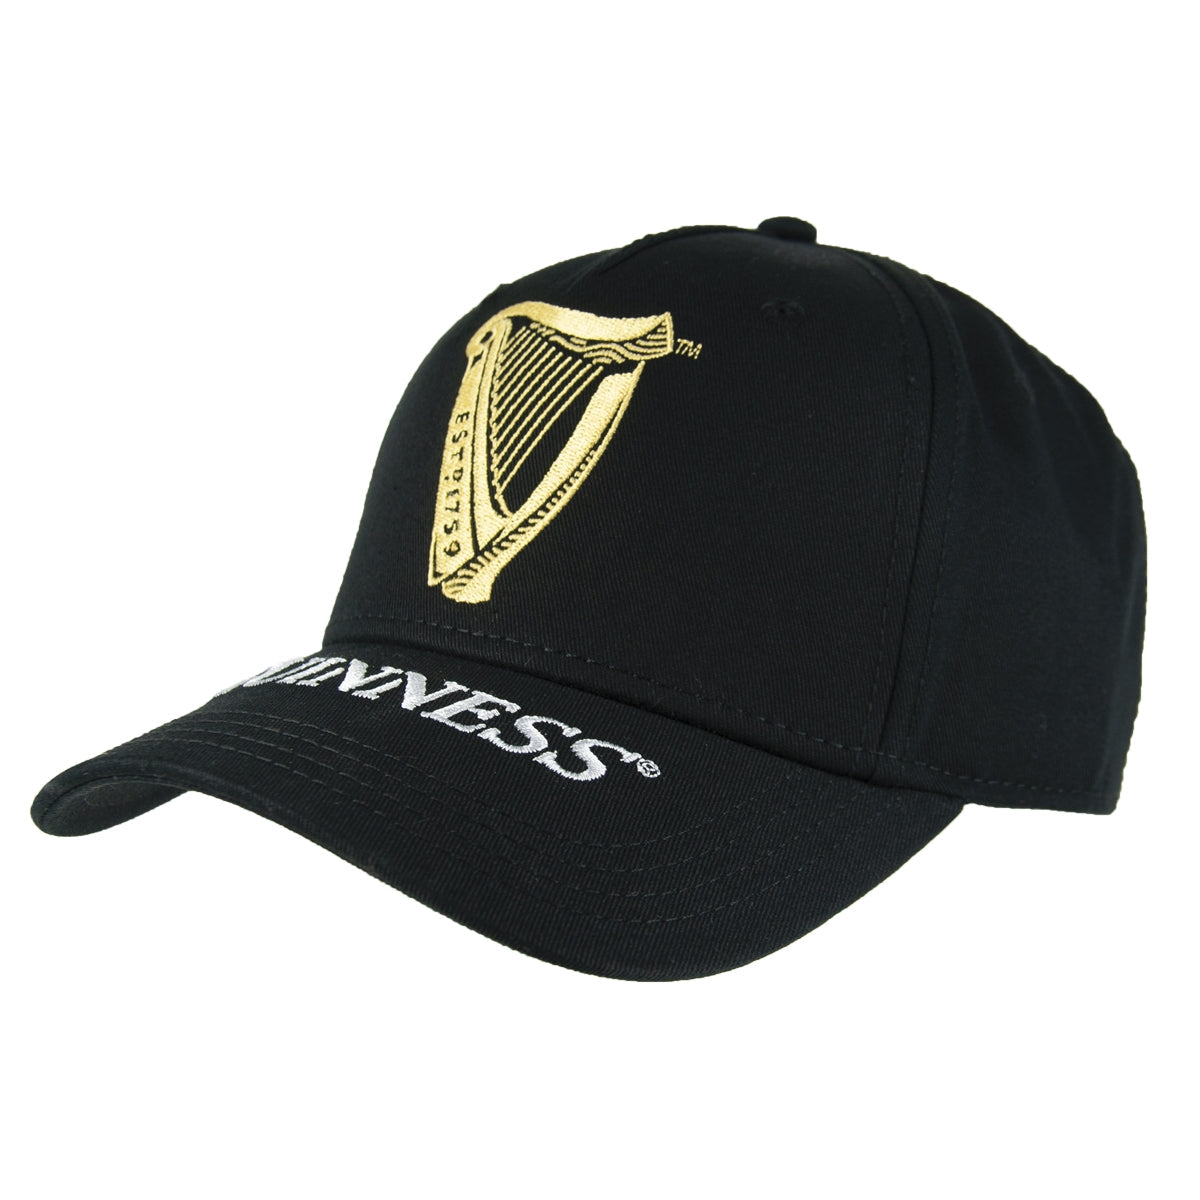 A Guinness Harp Baseball Cap with a gold harp on it.